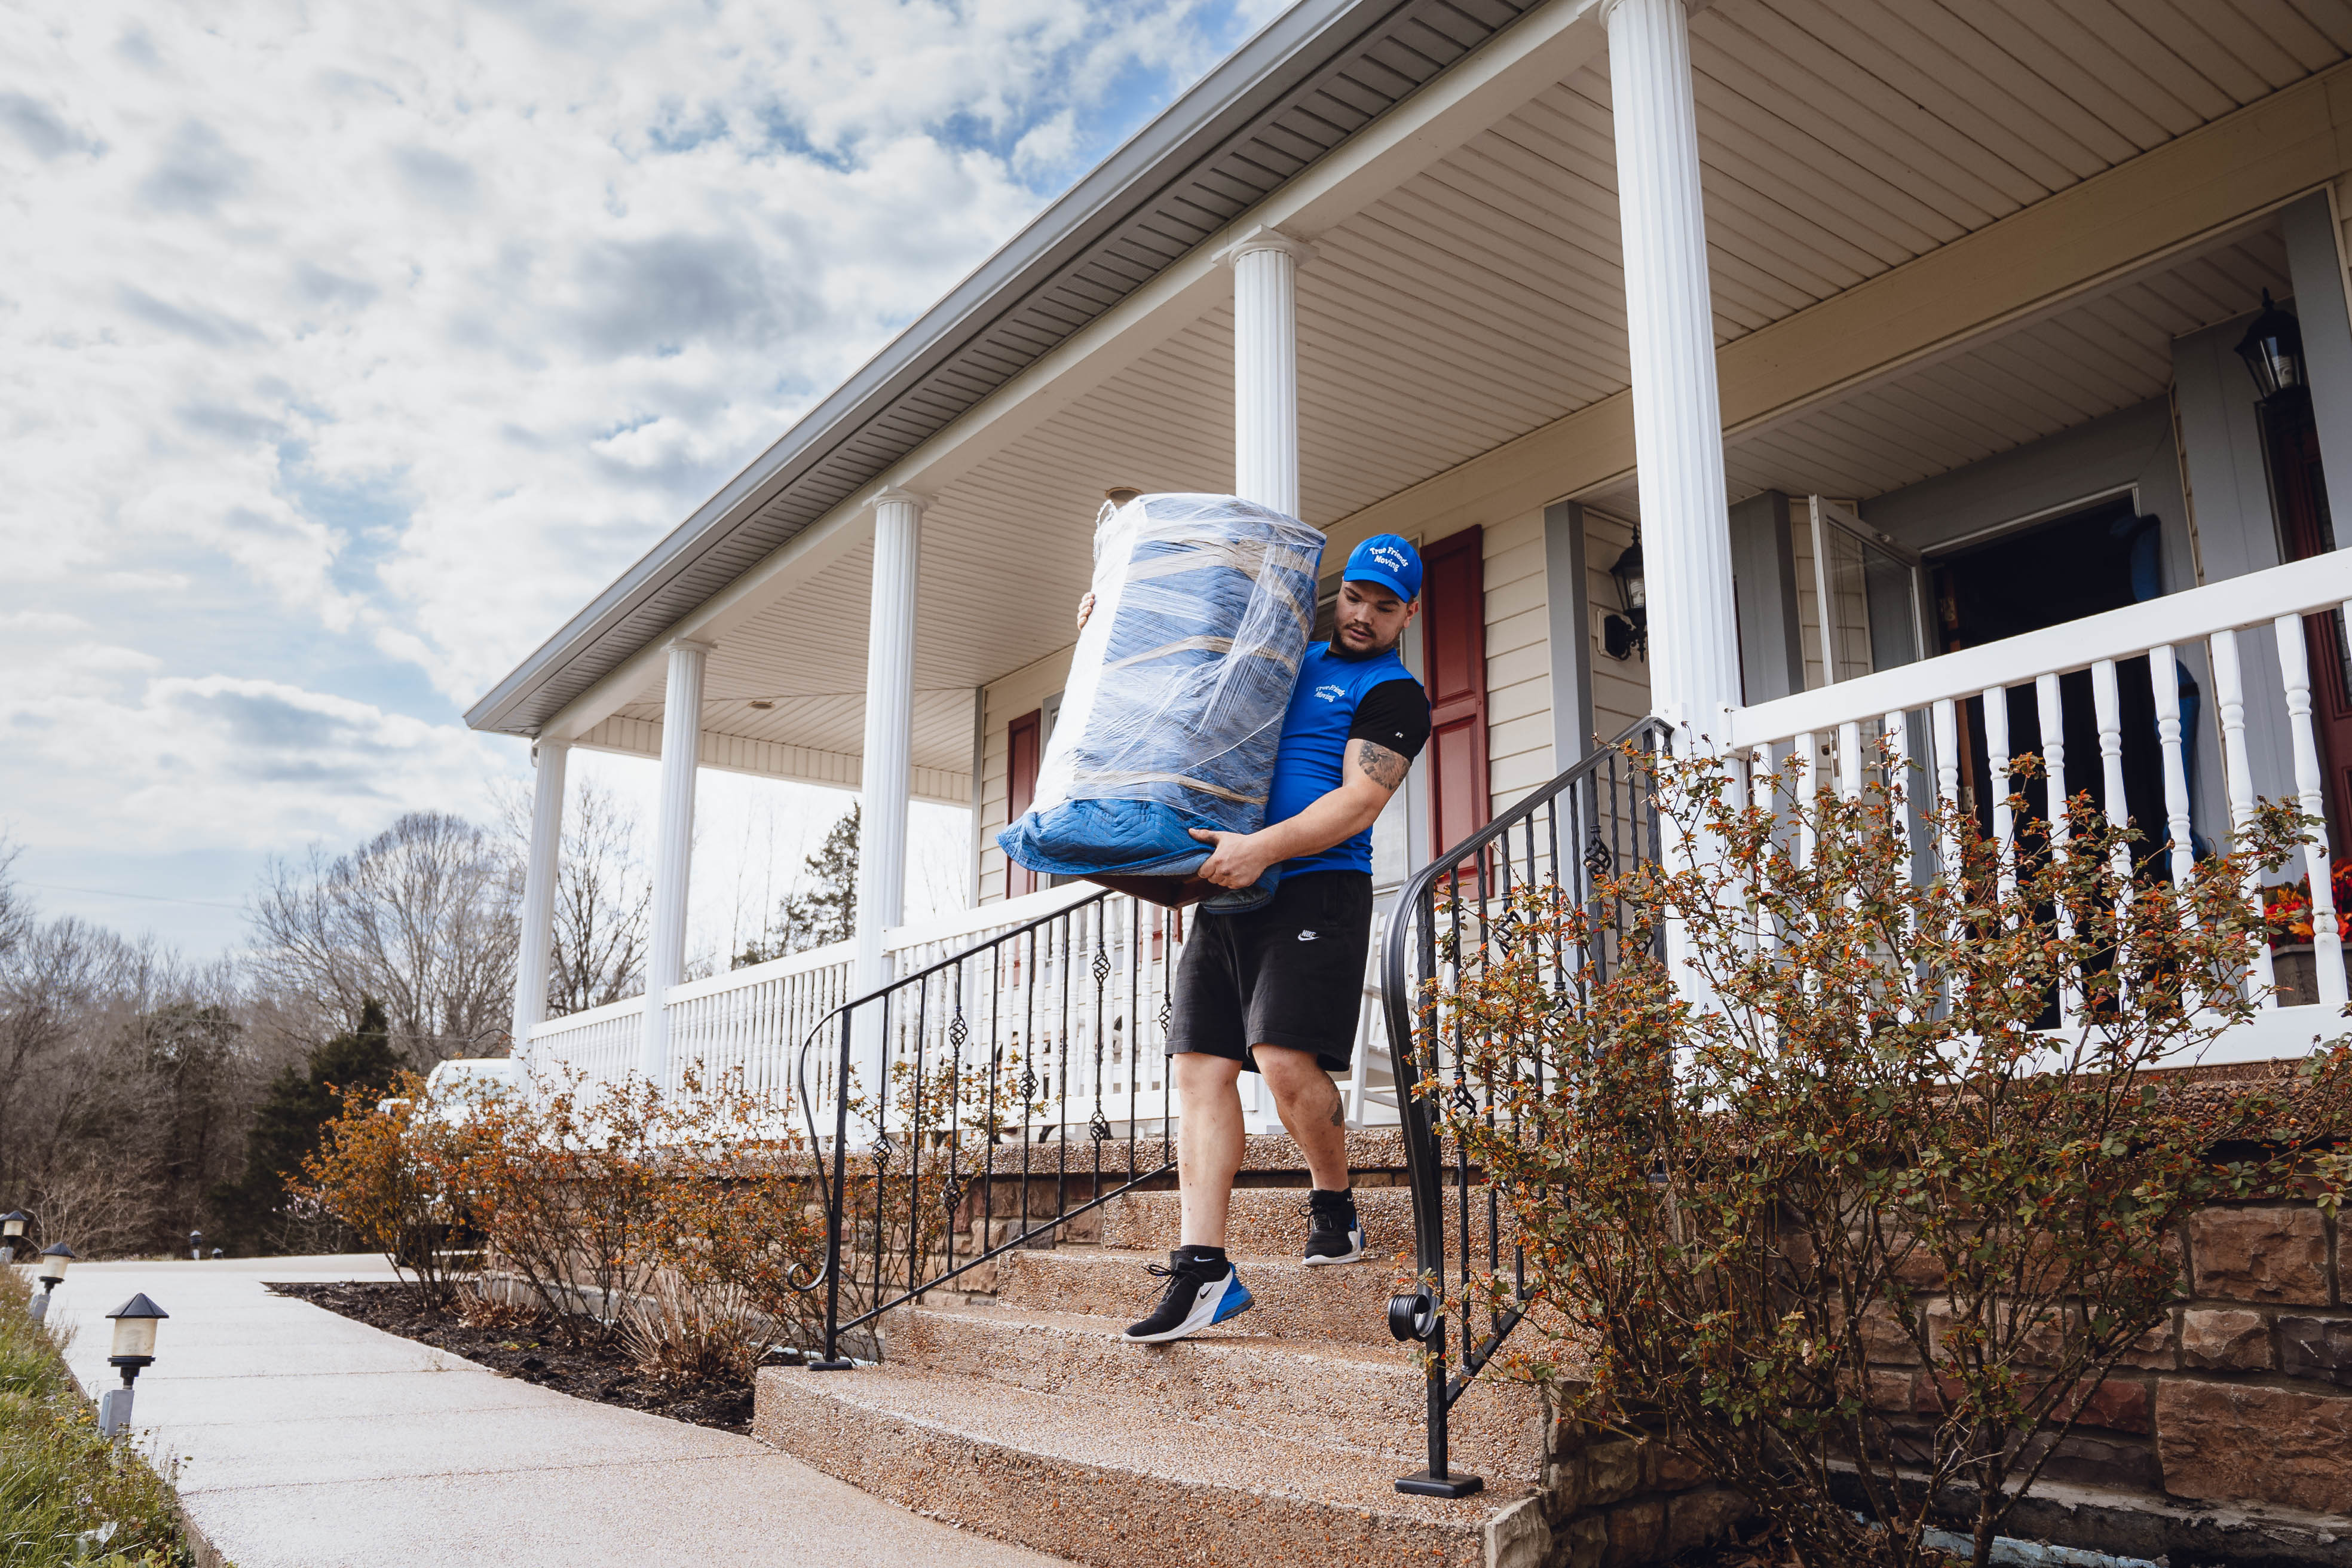 Local Gallatin Movers Offer Shrink-Wrapping & Packing For Apartment Moving